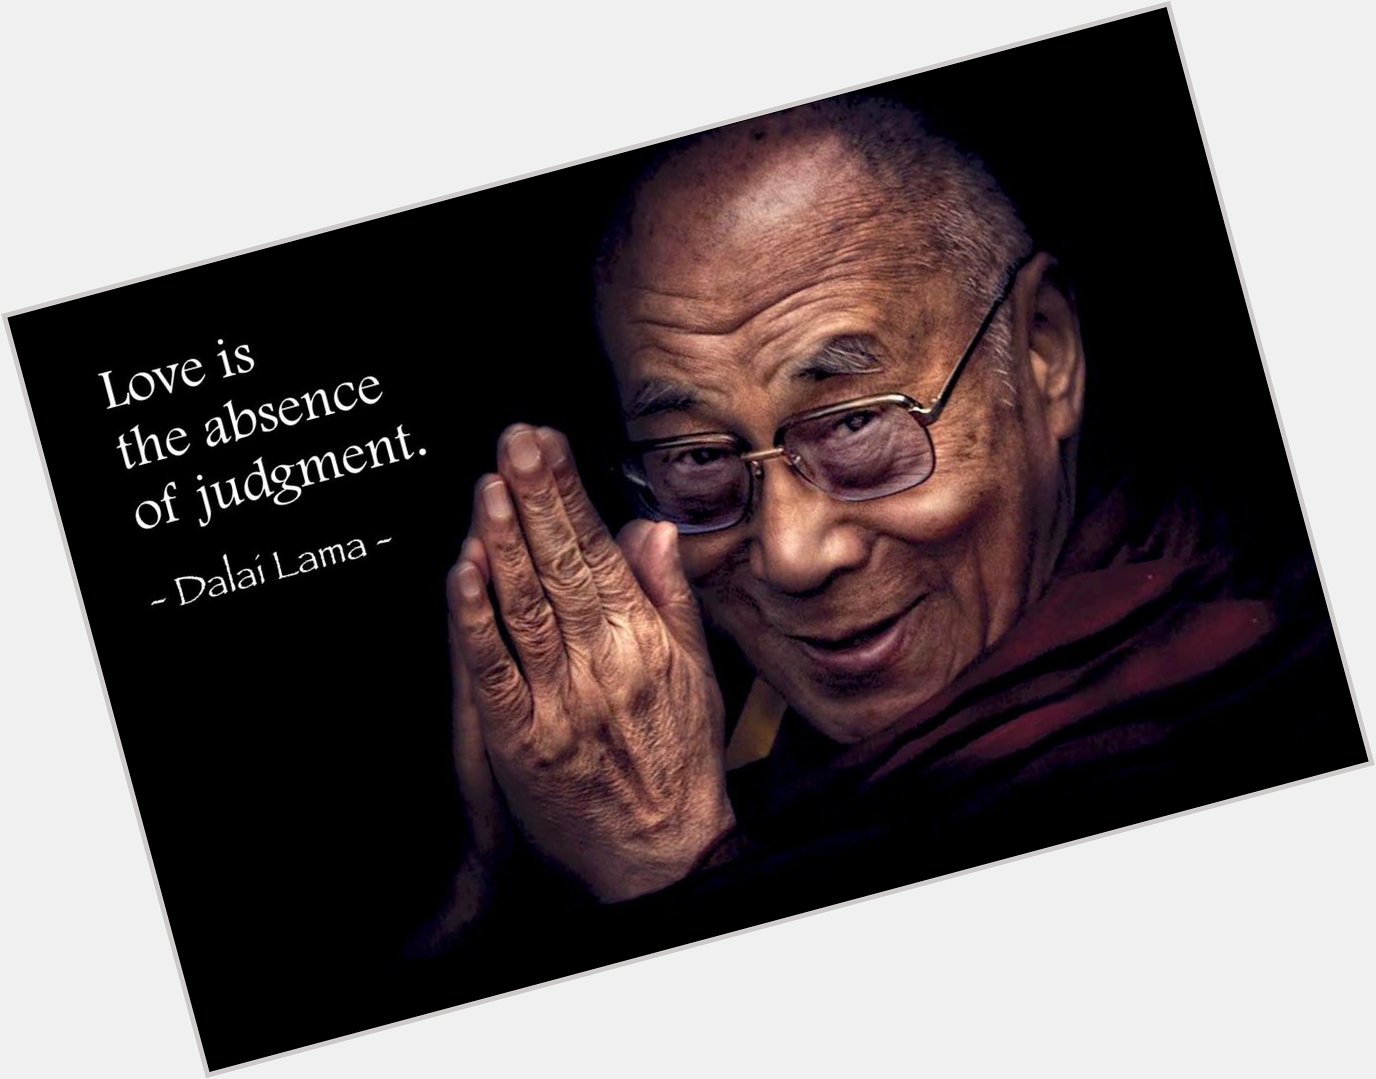 Happy 82nd Birthday to the Dalai Lama \"Love is the absence of judgment\"  